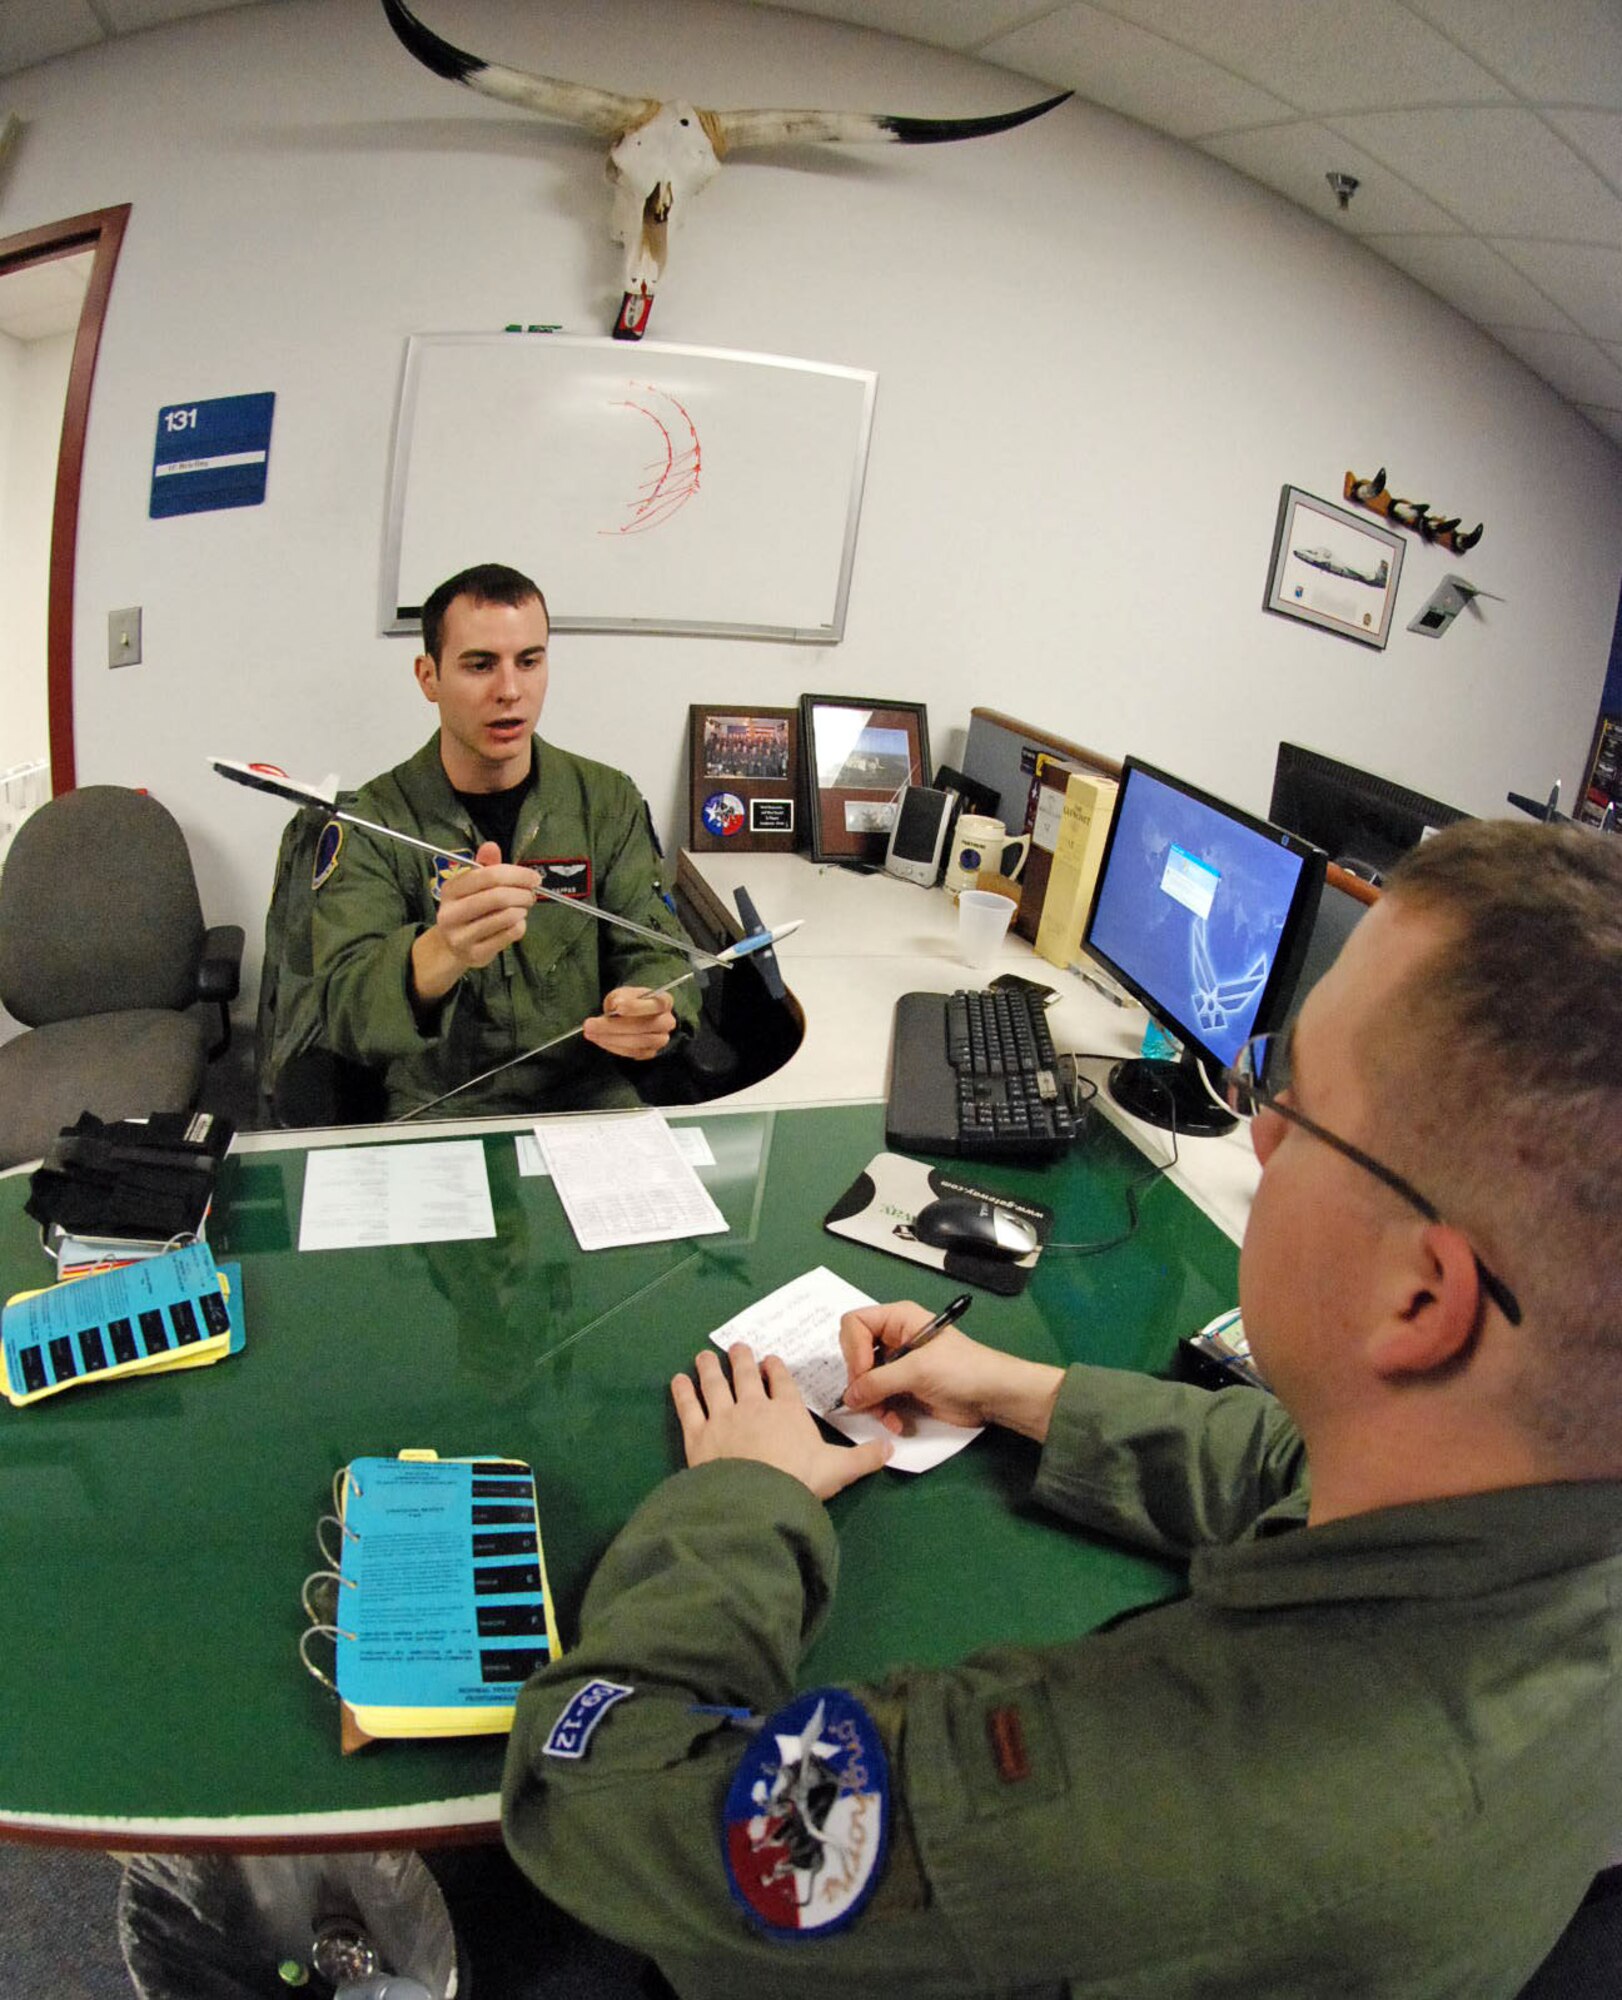 LAUGHLIN AIR FORCE BASE, Texas – First Lt. Paul Pappas, 84th Flying Training Squadron instructor pilot, de-briefs a student from the Longhorn’s flight Class 09-12 after a formation sortie Jan. 12. Laughlin trains more than 300 pilots annually living up to the wing’s motto “America’s airpower starts here.”(U.S. Air Force photo by Airman 1st Class Sara Csurilla)